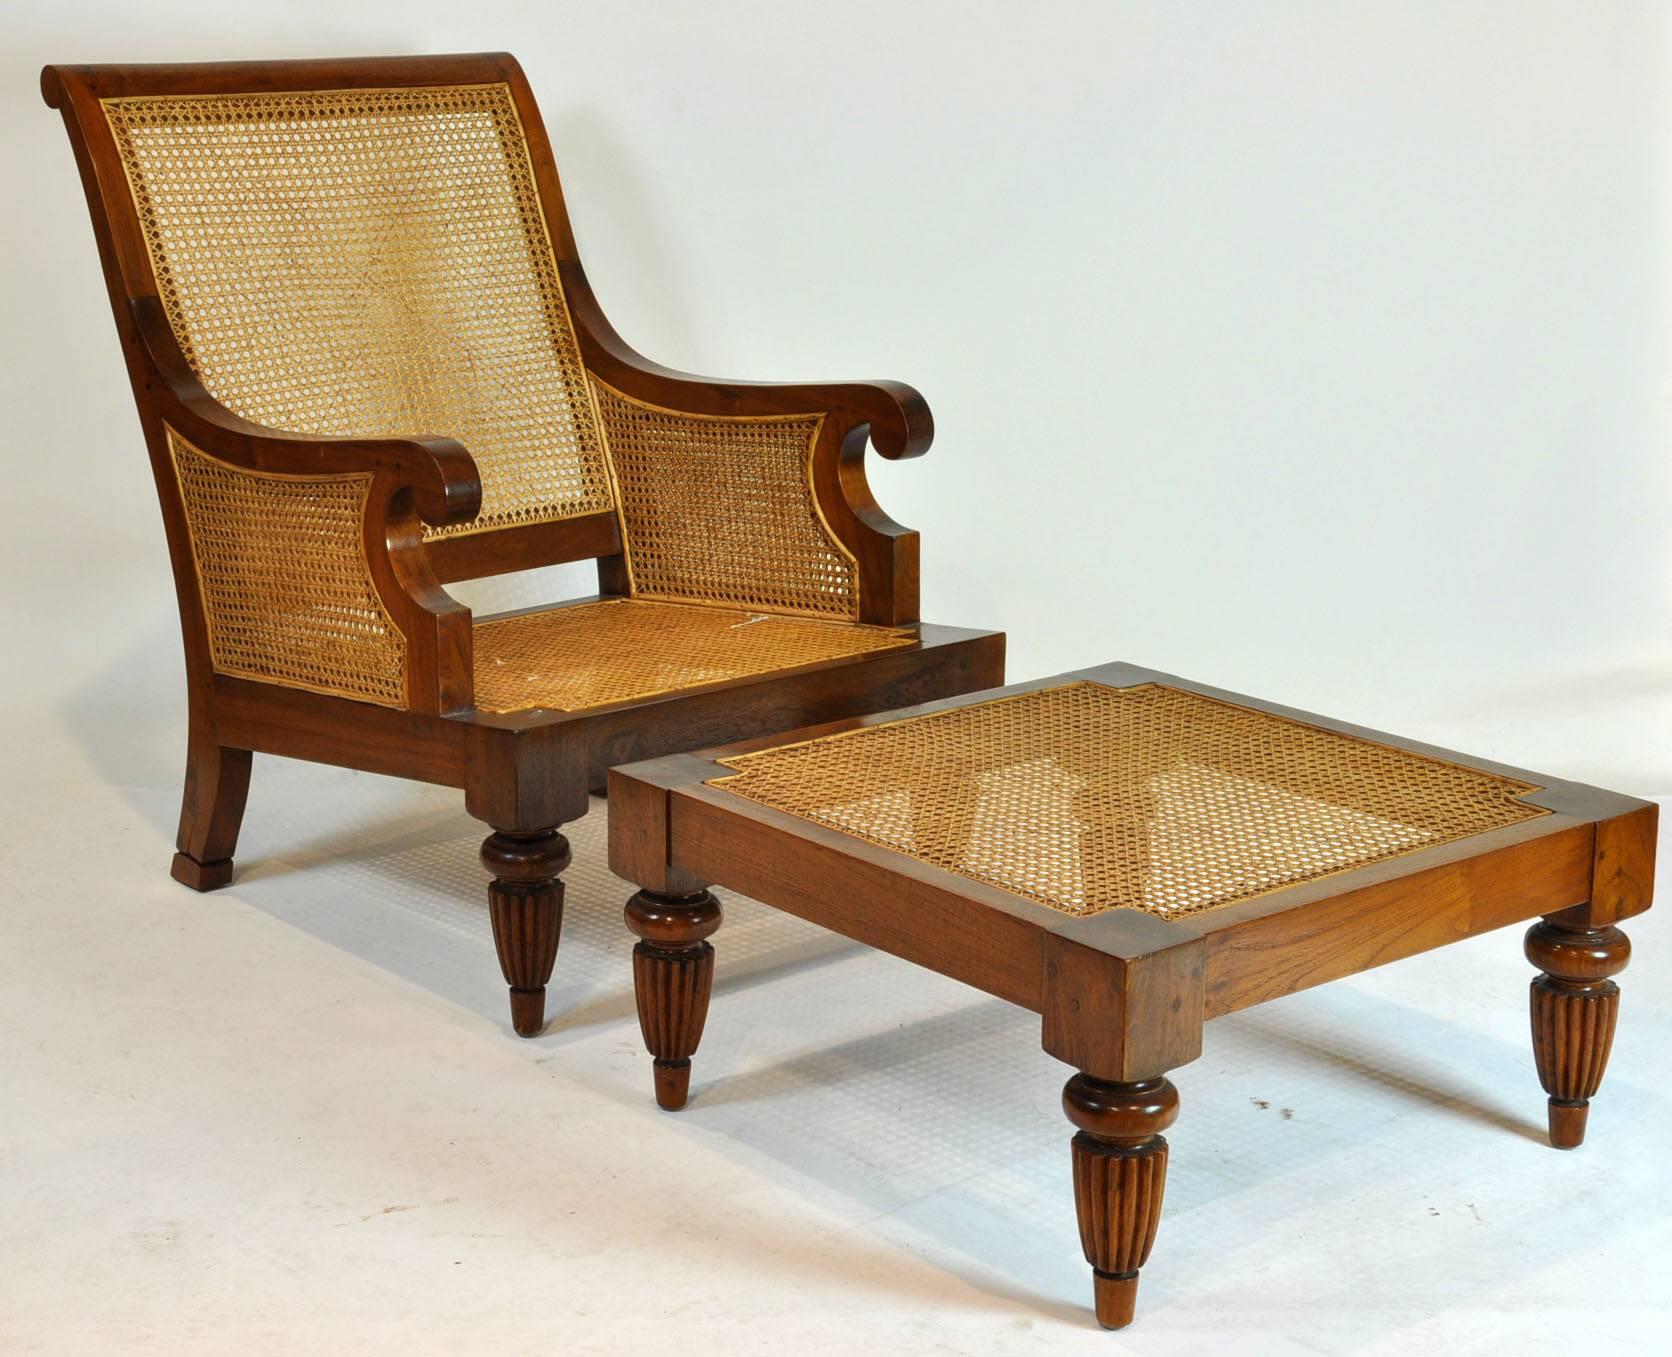 Made originally by British Colonial Imports but now out of production. Canning is still in good condition. Lounge chair or plantation chair. Named 'Lord Canning Lounge Chair'.